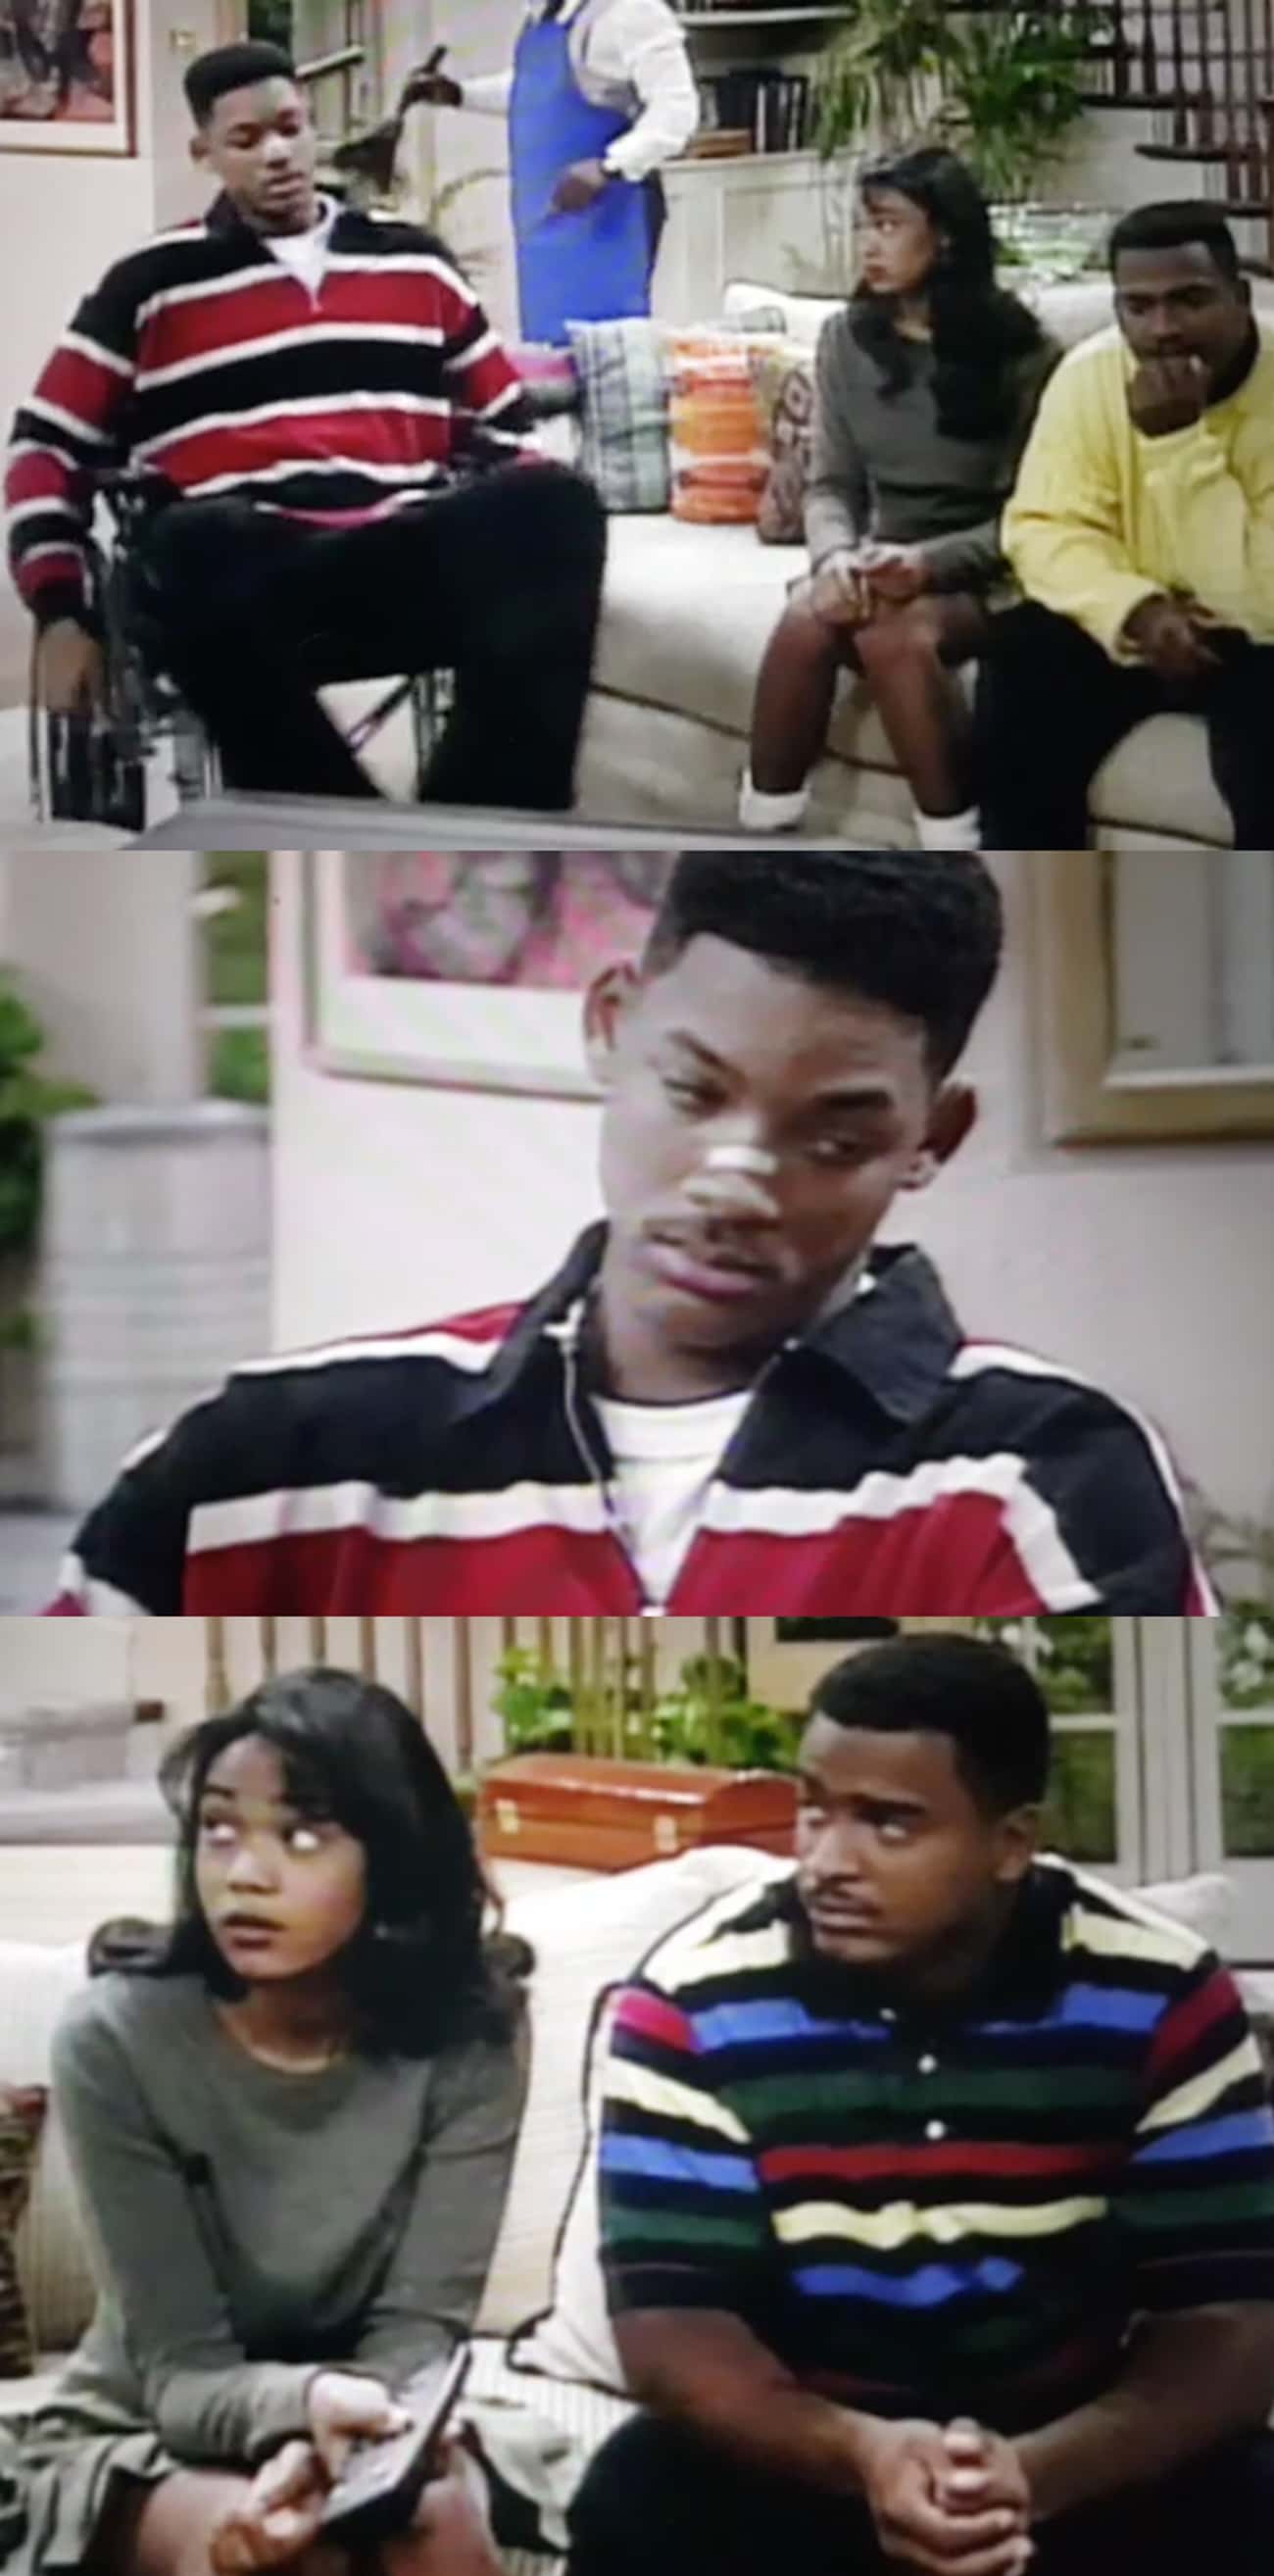 Carlton's Sweater Changes Between Shots In 'The Fresh Prince of Bel-Air'